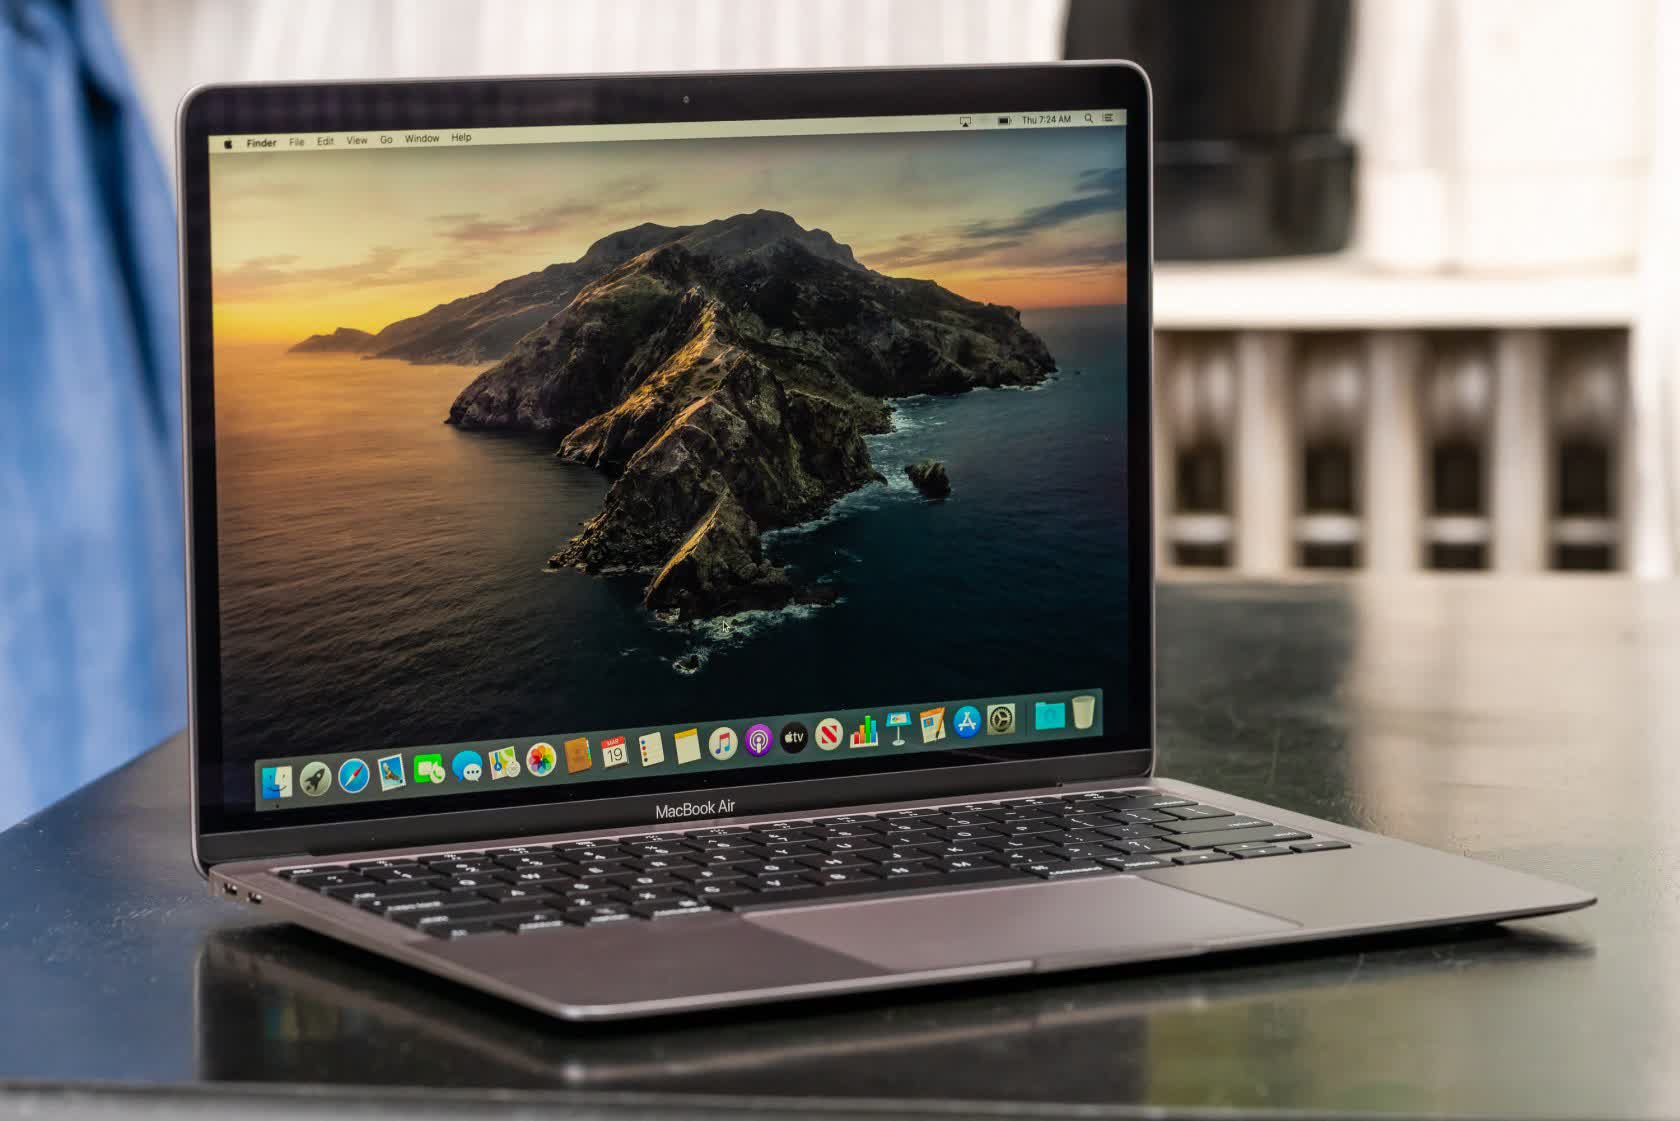 Google, Facebook, and others reportedly won't offer their iOS apps on Apple's Silicon Macs